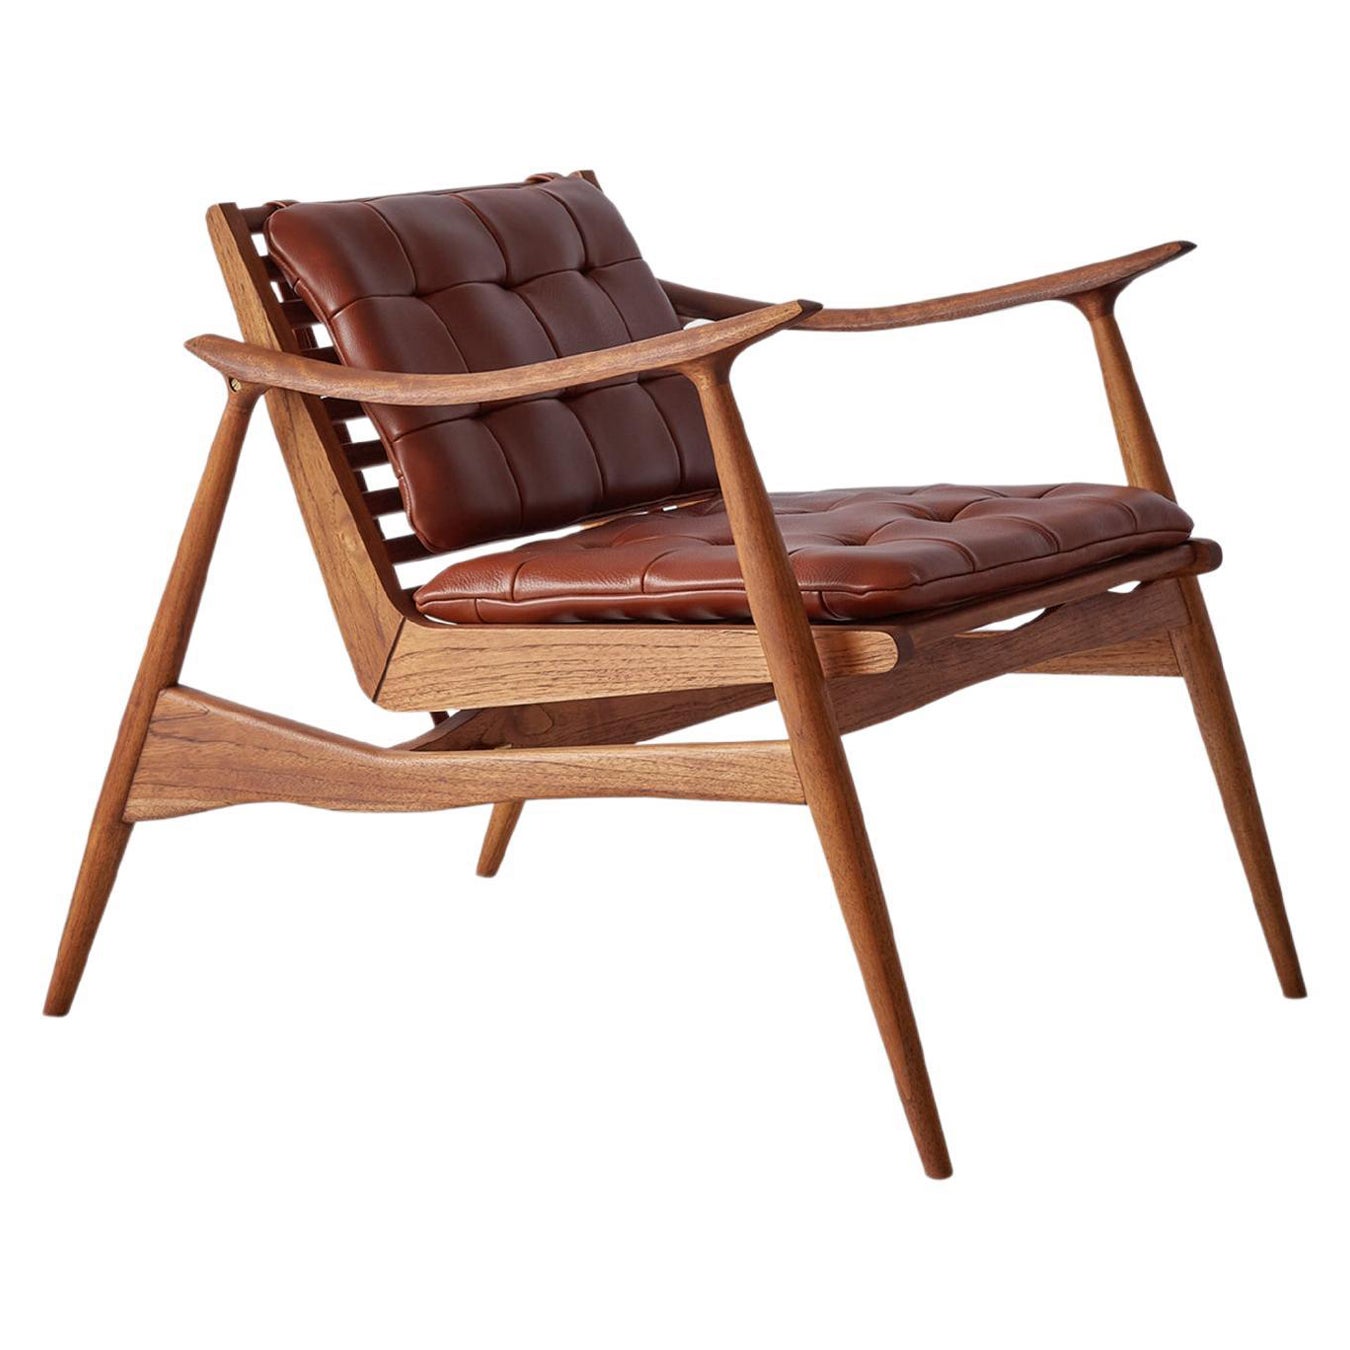 Brown Atra Lounge Chair by Atra Design For Sale